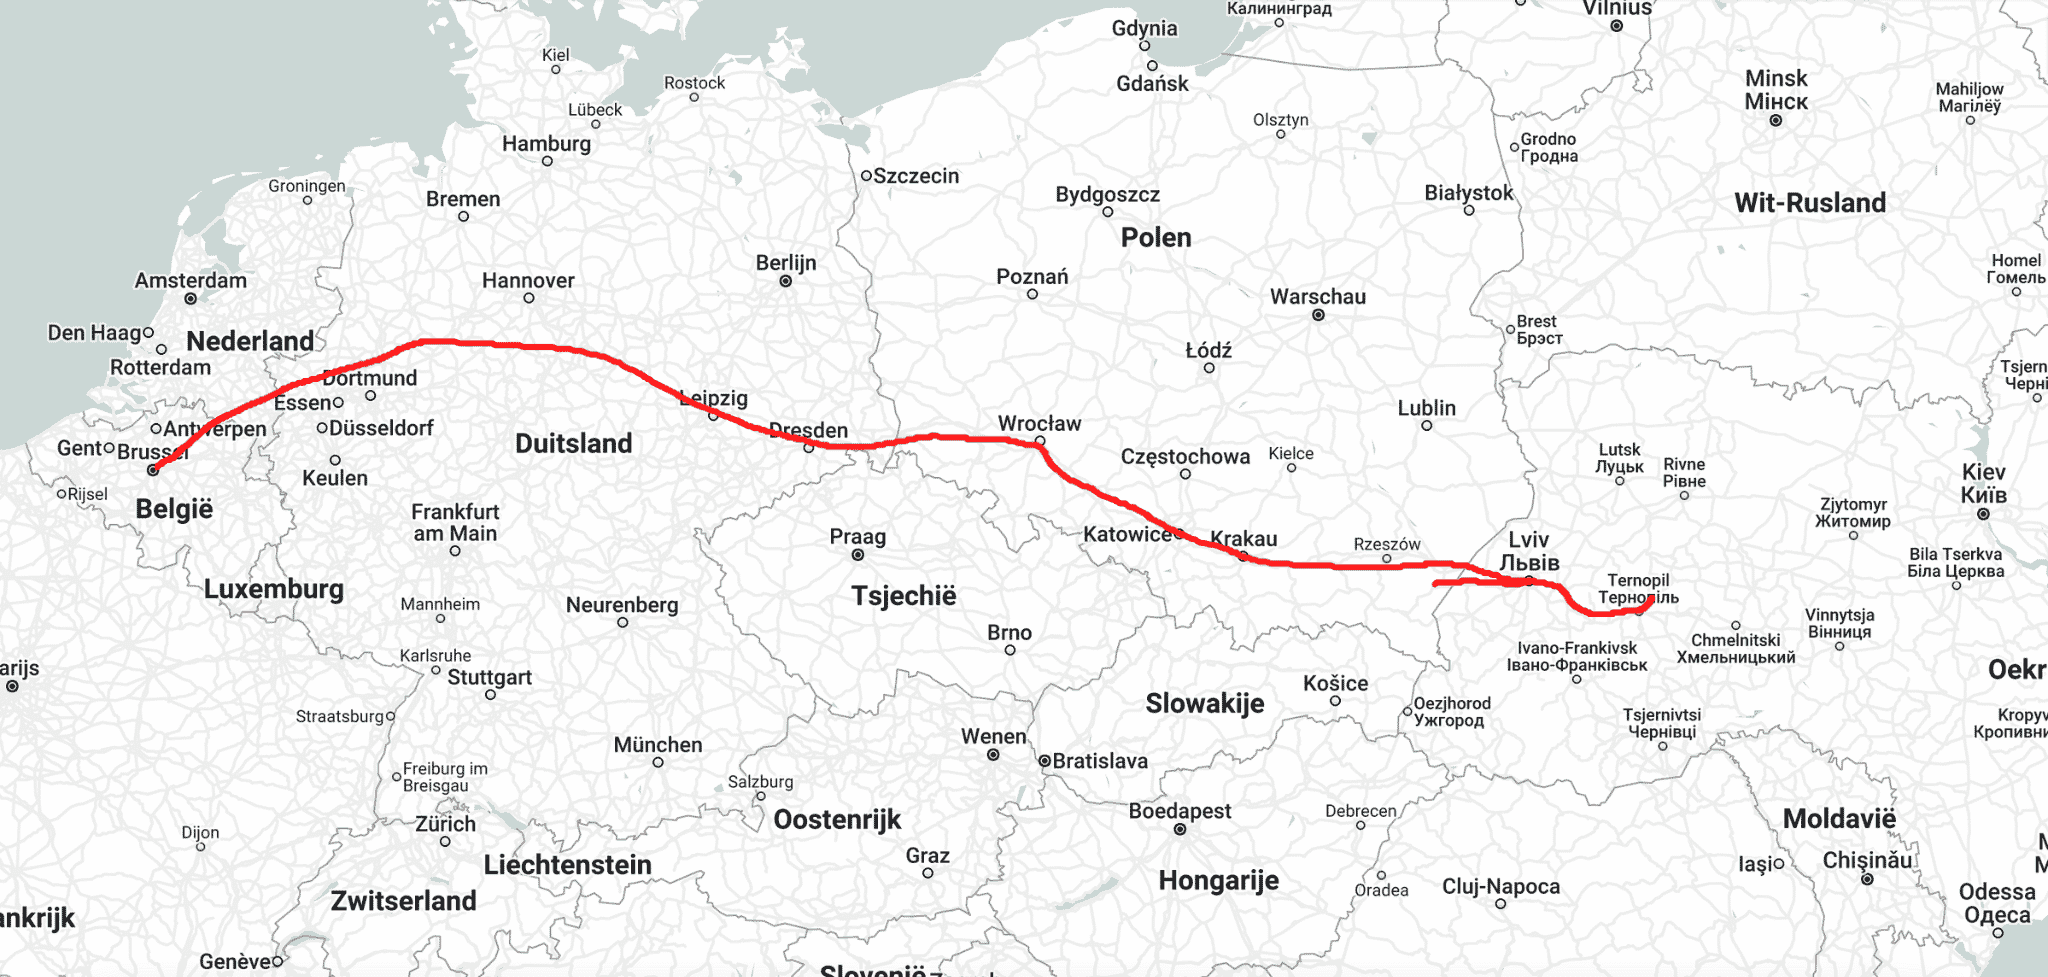 Cycling itinerary from Brussels to Ukraine